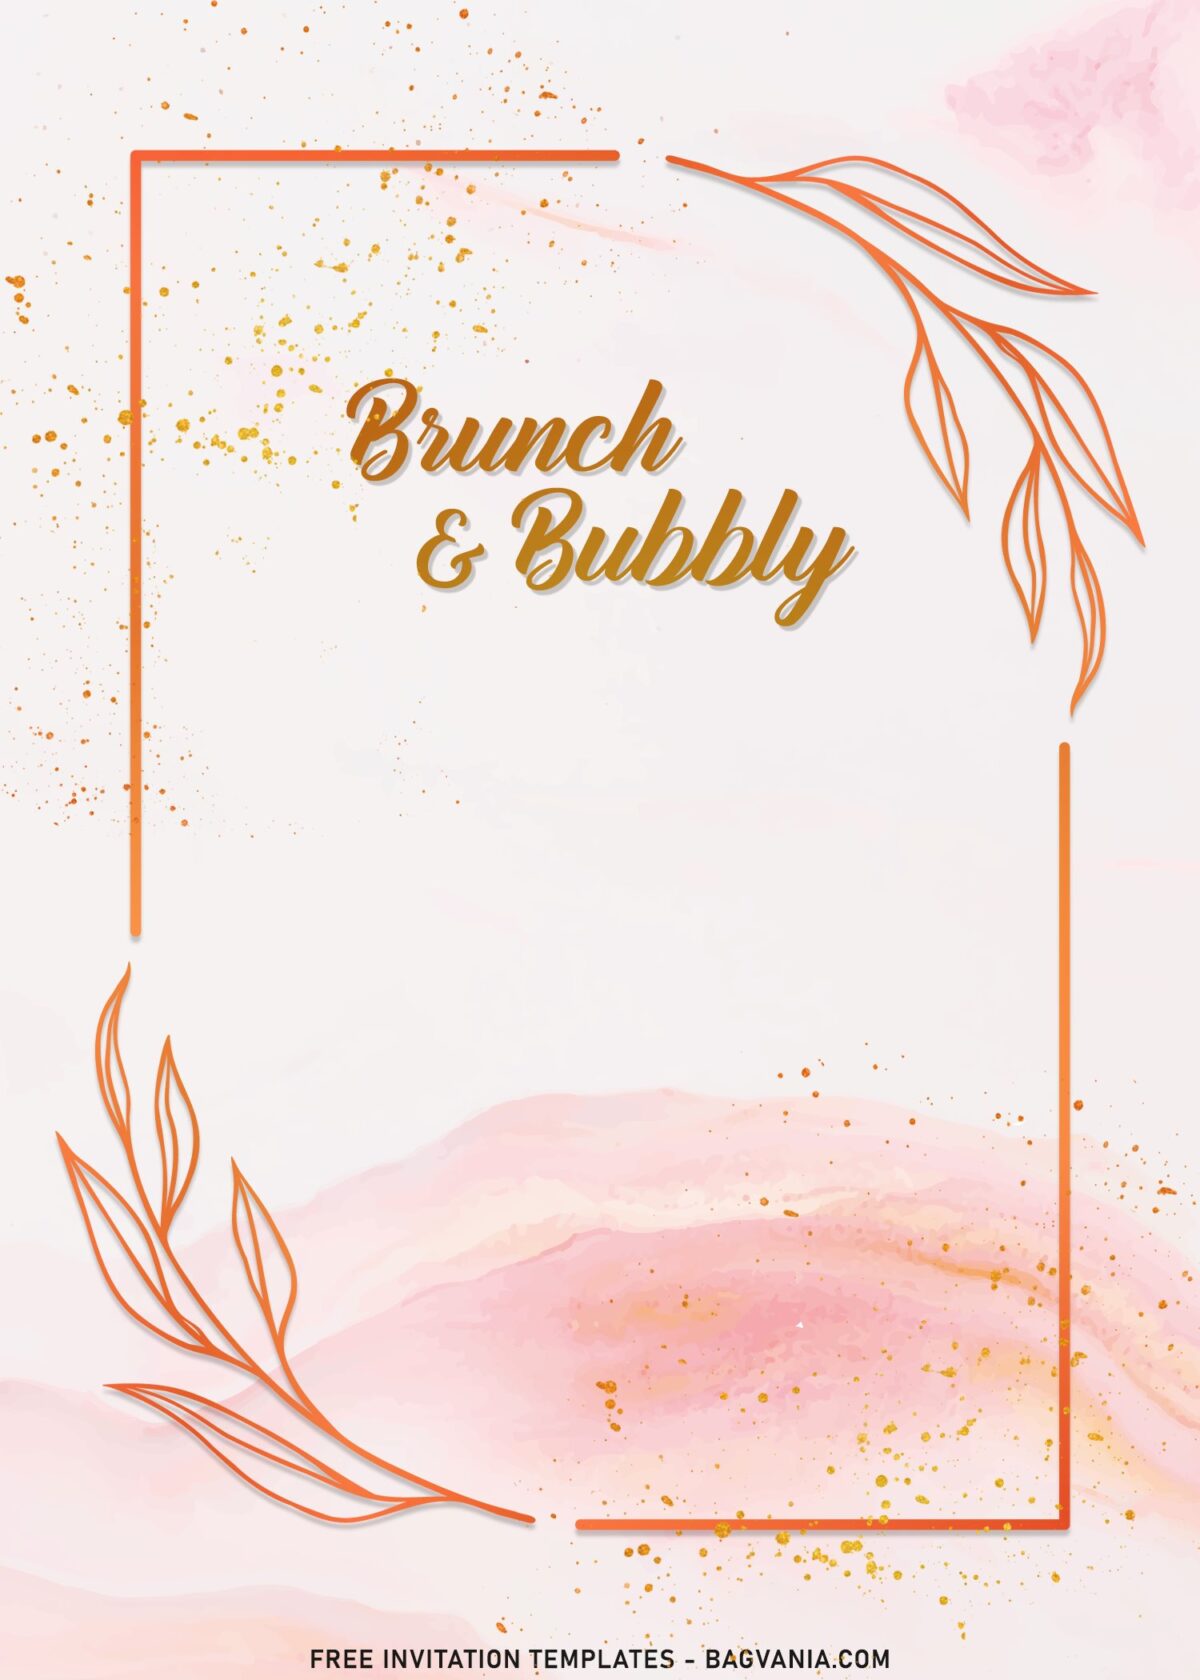 8+ Classy Brunch And Bubbly Party Invitation Templates with stuning blush pink marble background